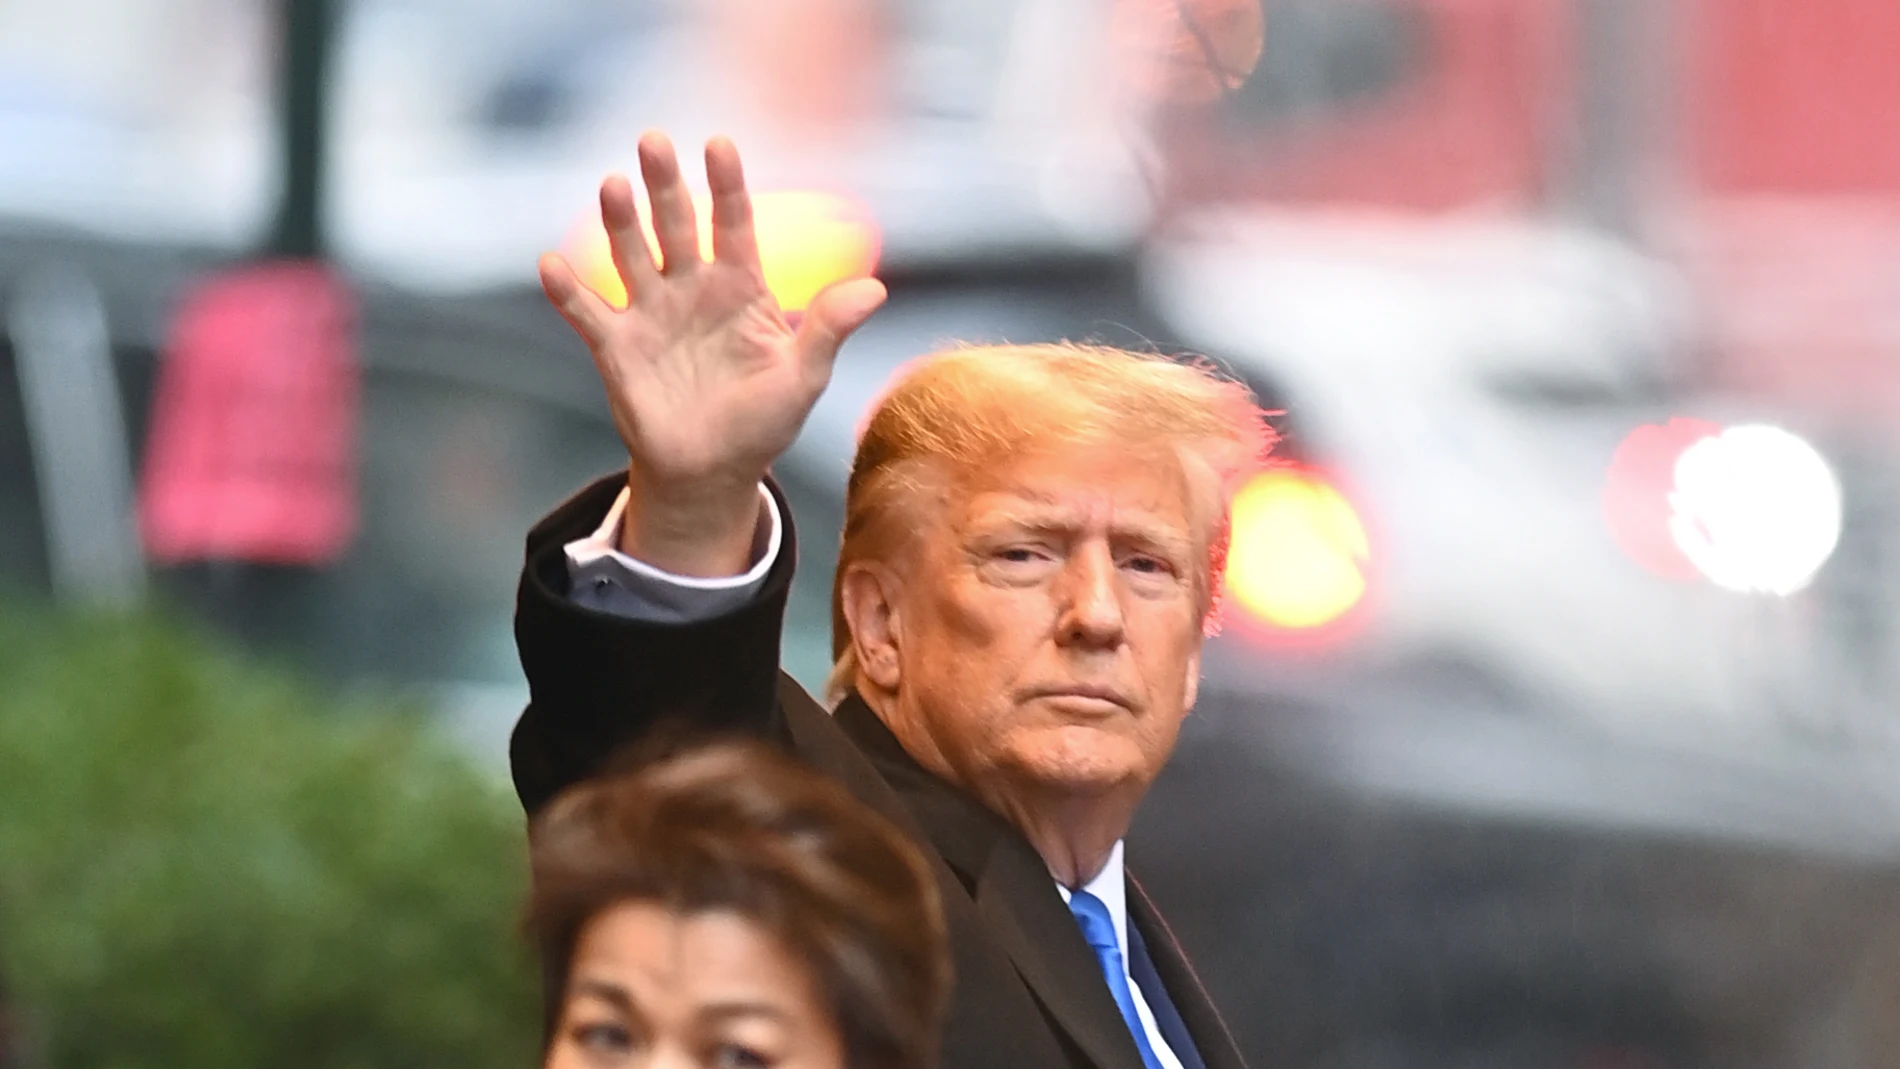 January 25, 2024, New York, New York, USA: Former President Donald Trump leaves Trump Tower on Fifth Avenue on his way to Federal Court for the ongoing defamation trial brought by E.Jean Carroll in lower Manhattan, following his win in New Hampshire for the Republican Party 2024 election. (PHOTO: Andrea RENAULT/Zuma Press)25/01/2024